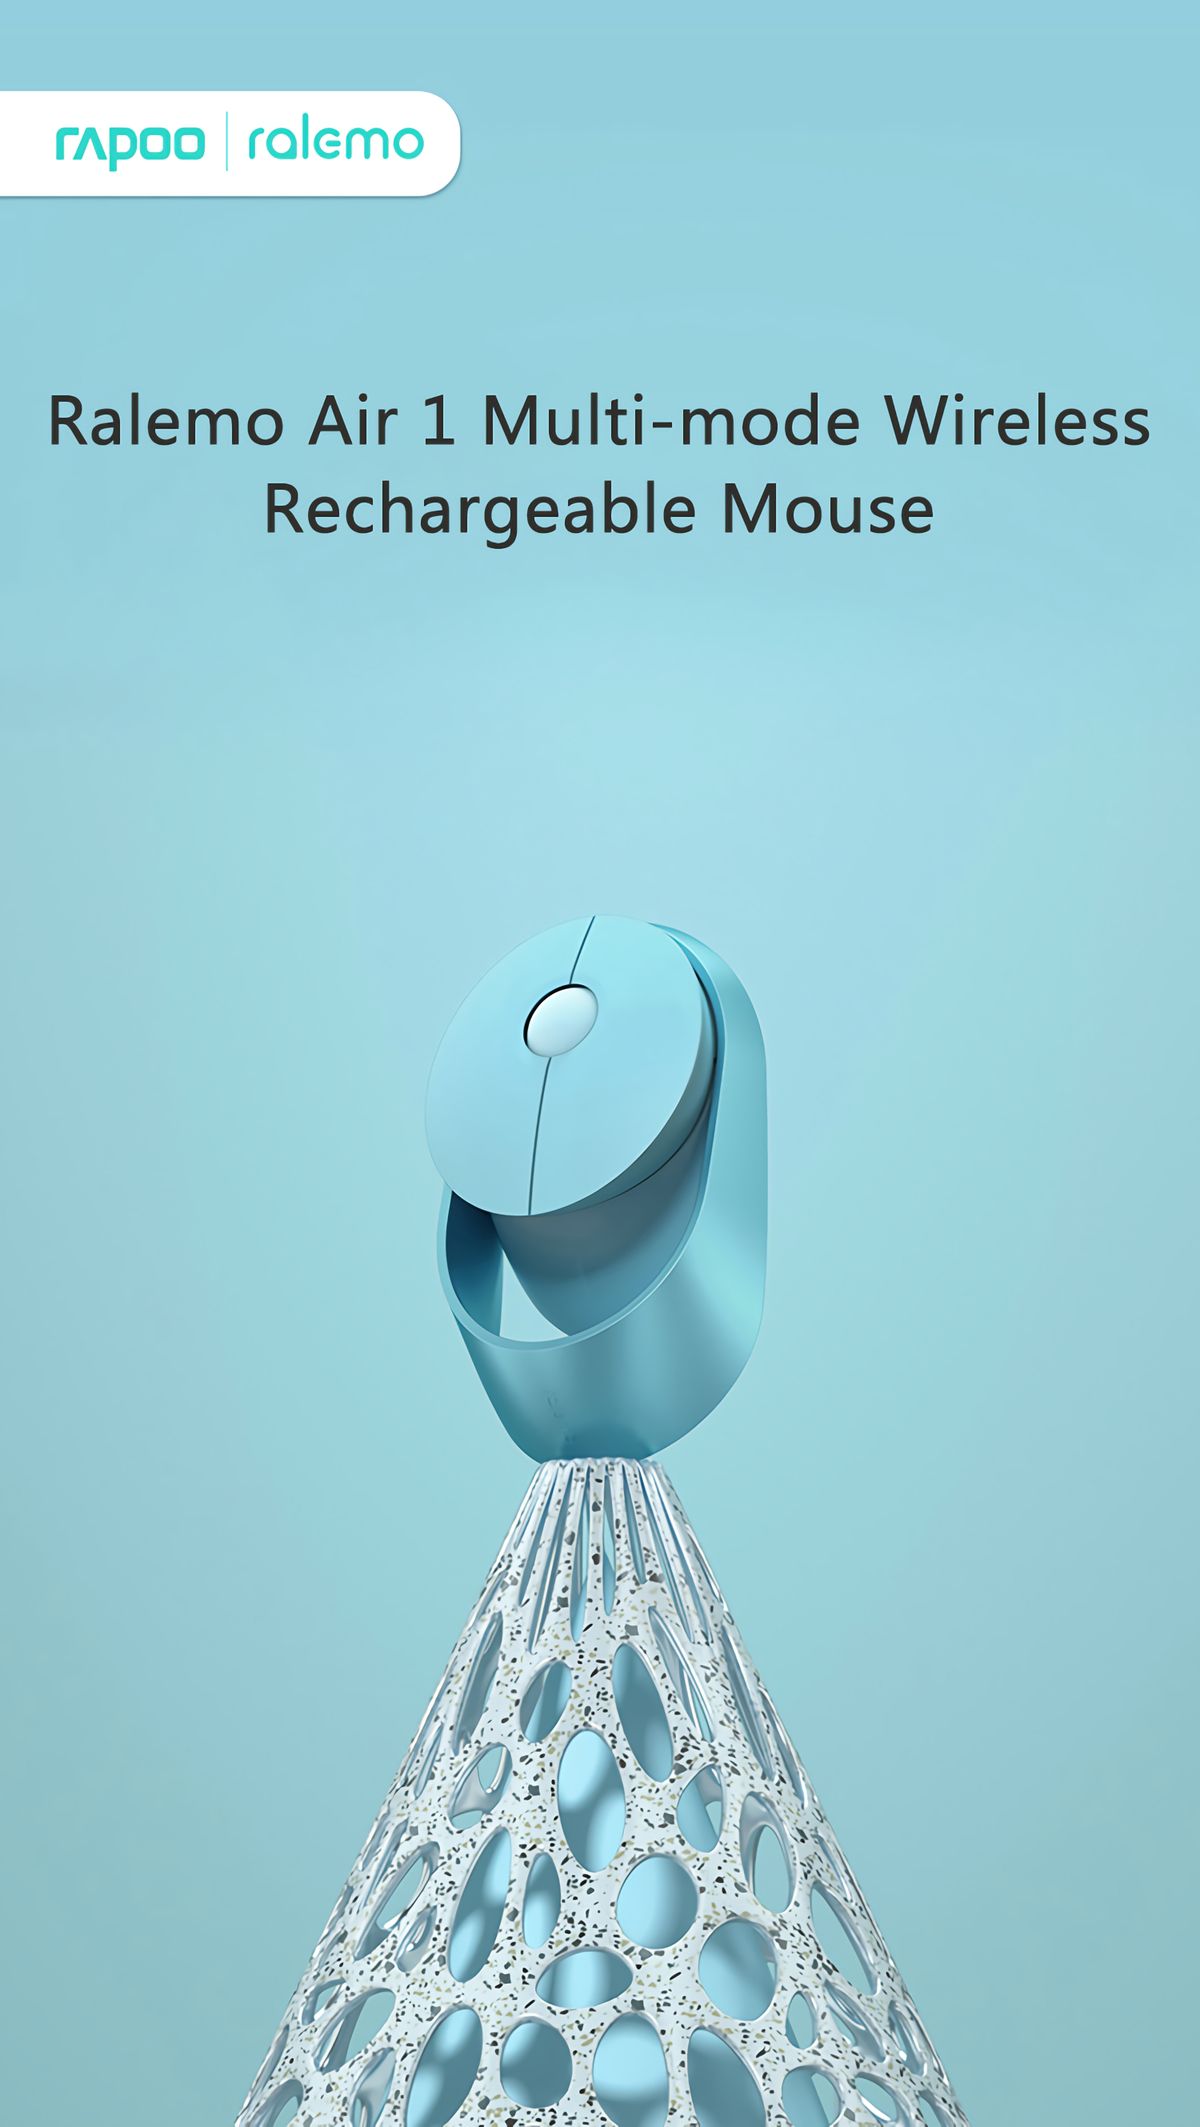 Rapoo-Ralemo-Air-1-Wireless-bluetooth-Mouse-Rechargeable-bluetooth-50--30--24G-Multi-mode-1600DPI-Si-1751347